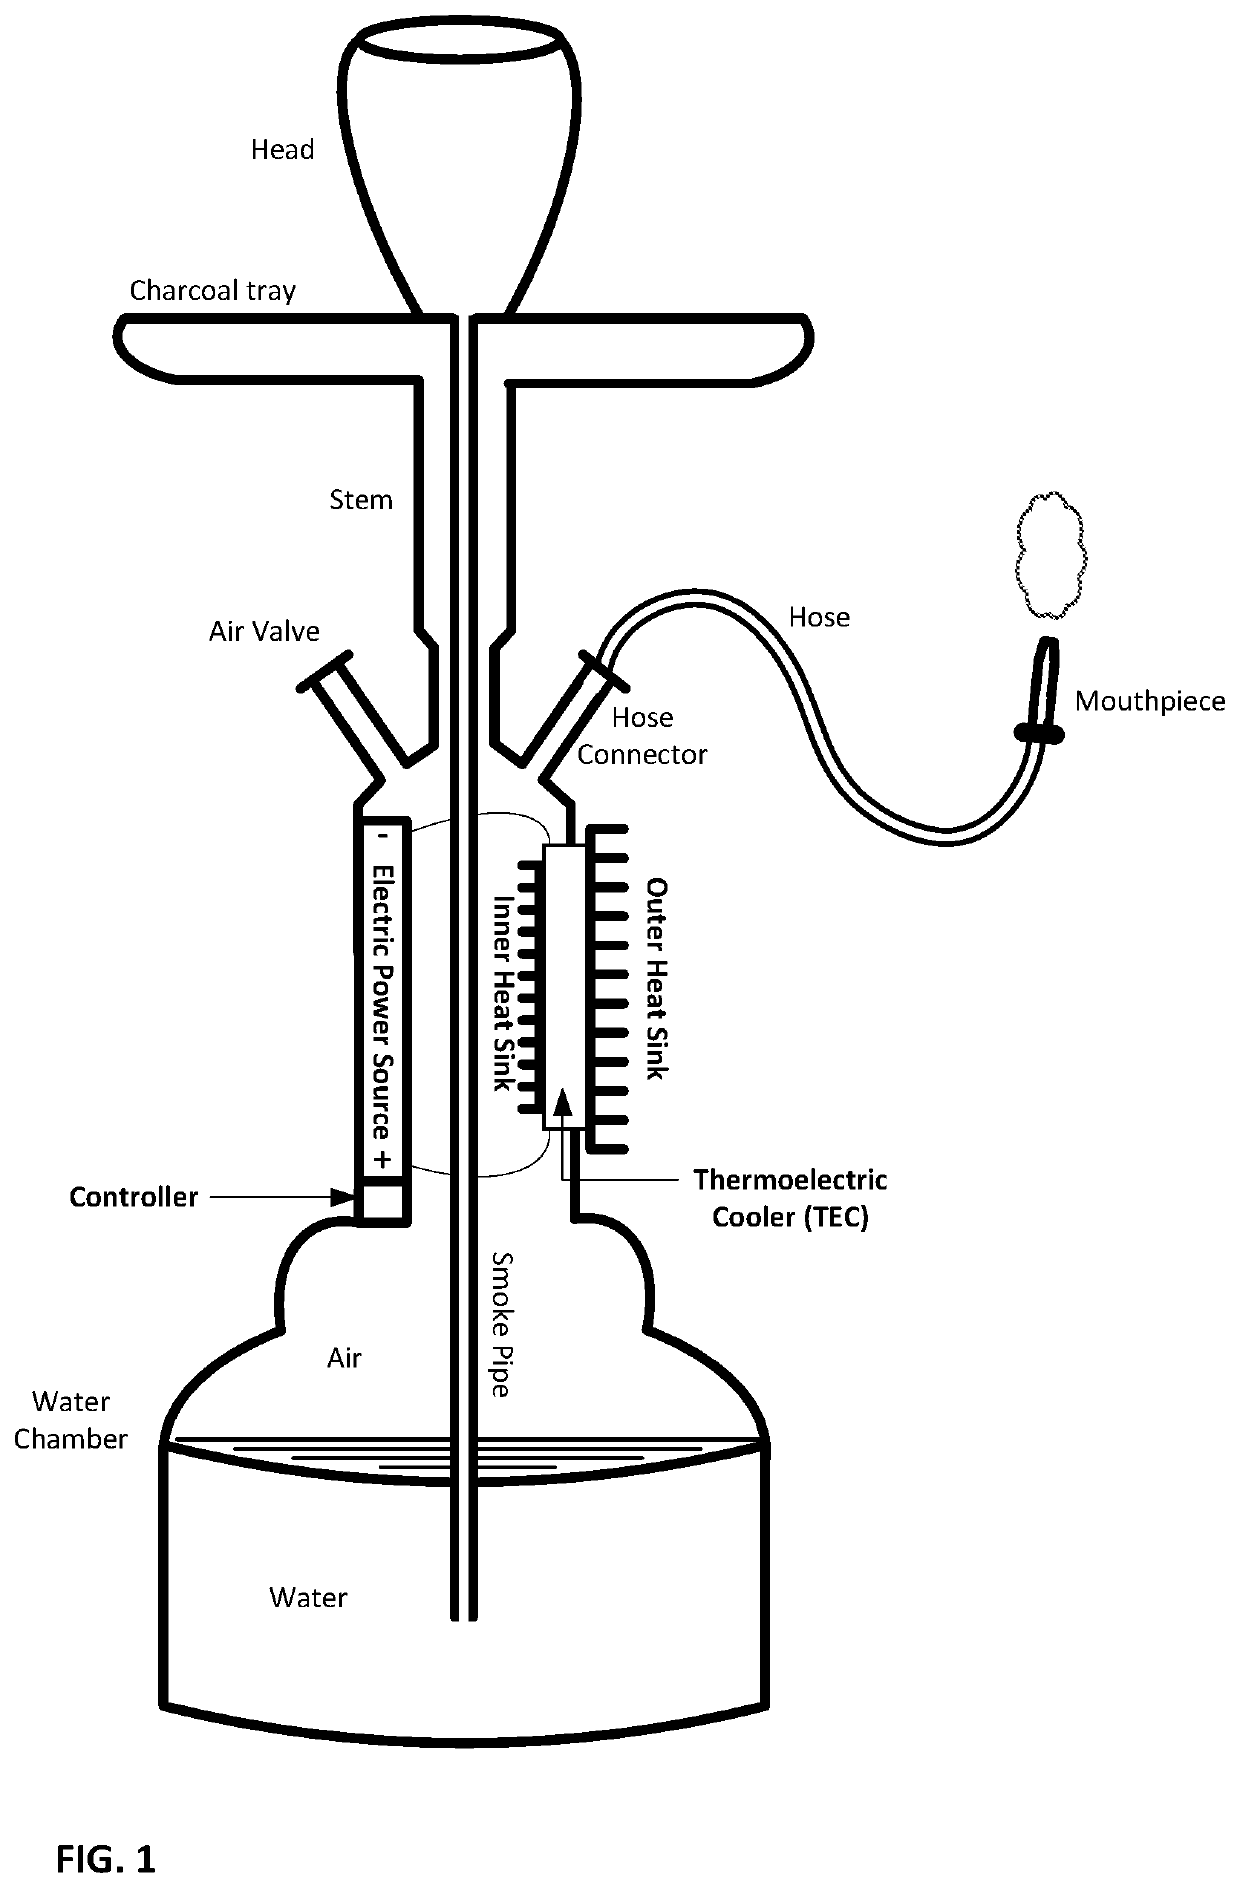 Chilled water pipe and a retrofit apparatus for chilling a water pipe